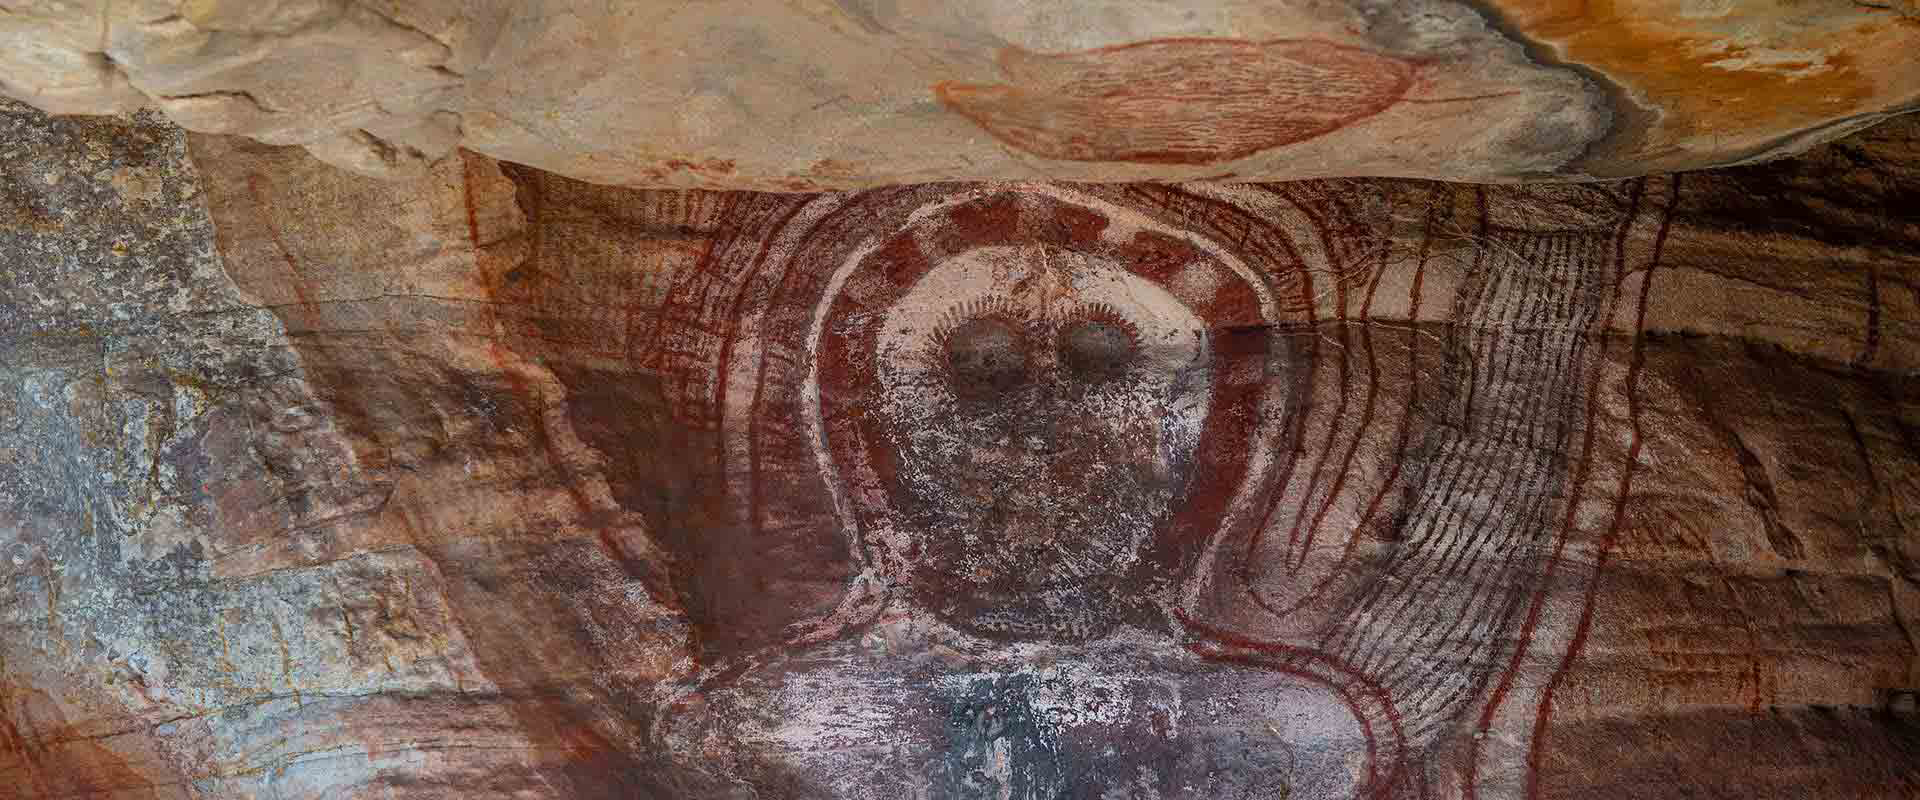 Discover the ancient Gwion rock art on Jar Island on a small ship expedition cruise